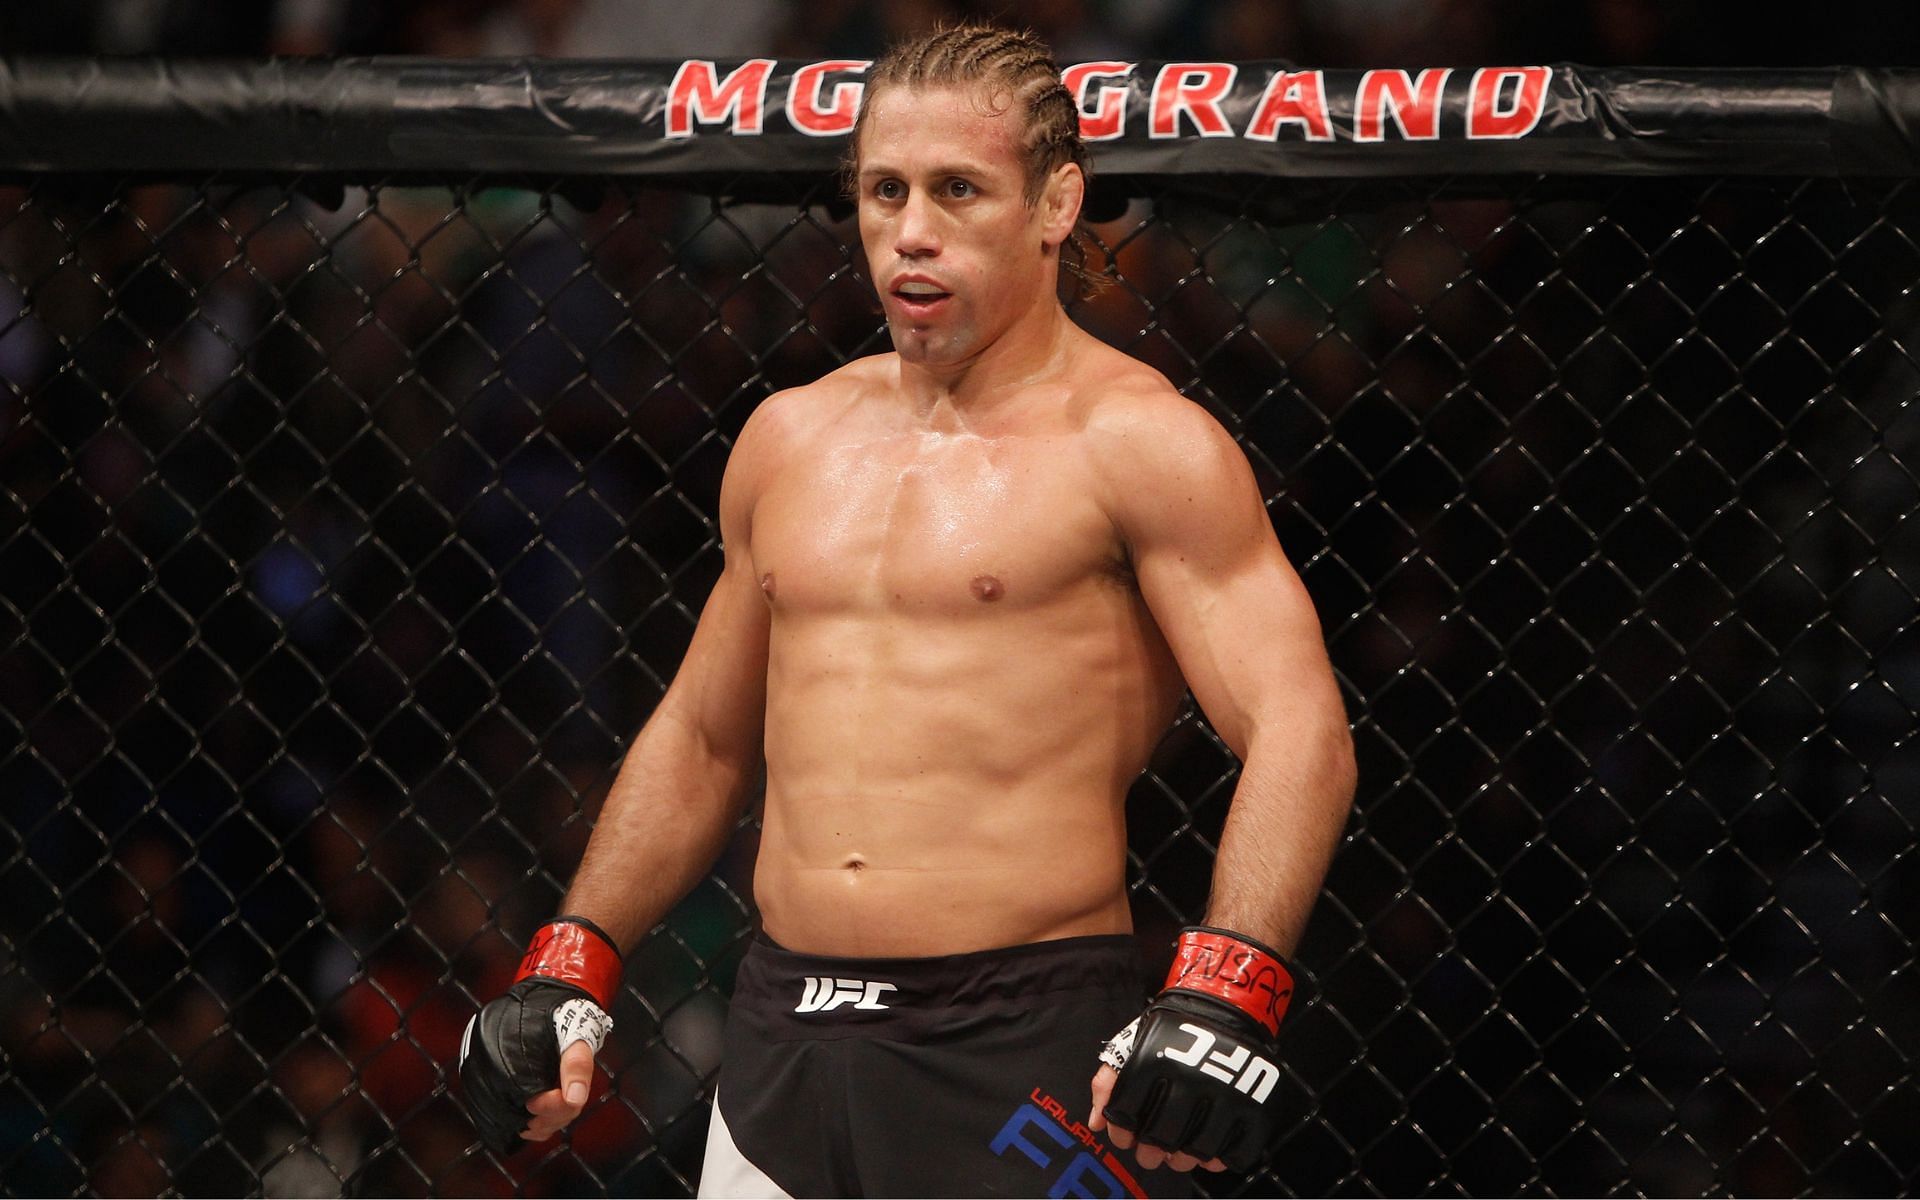 MMA great and UFC Hall of Famer Urijah Faber